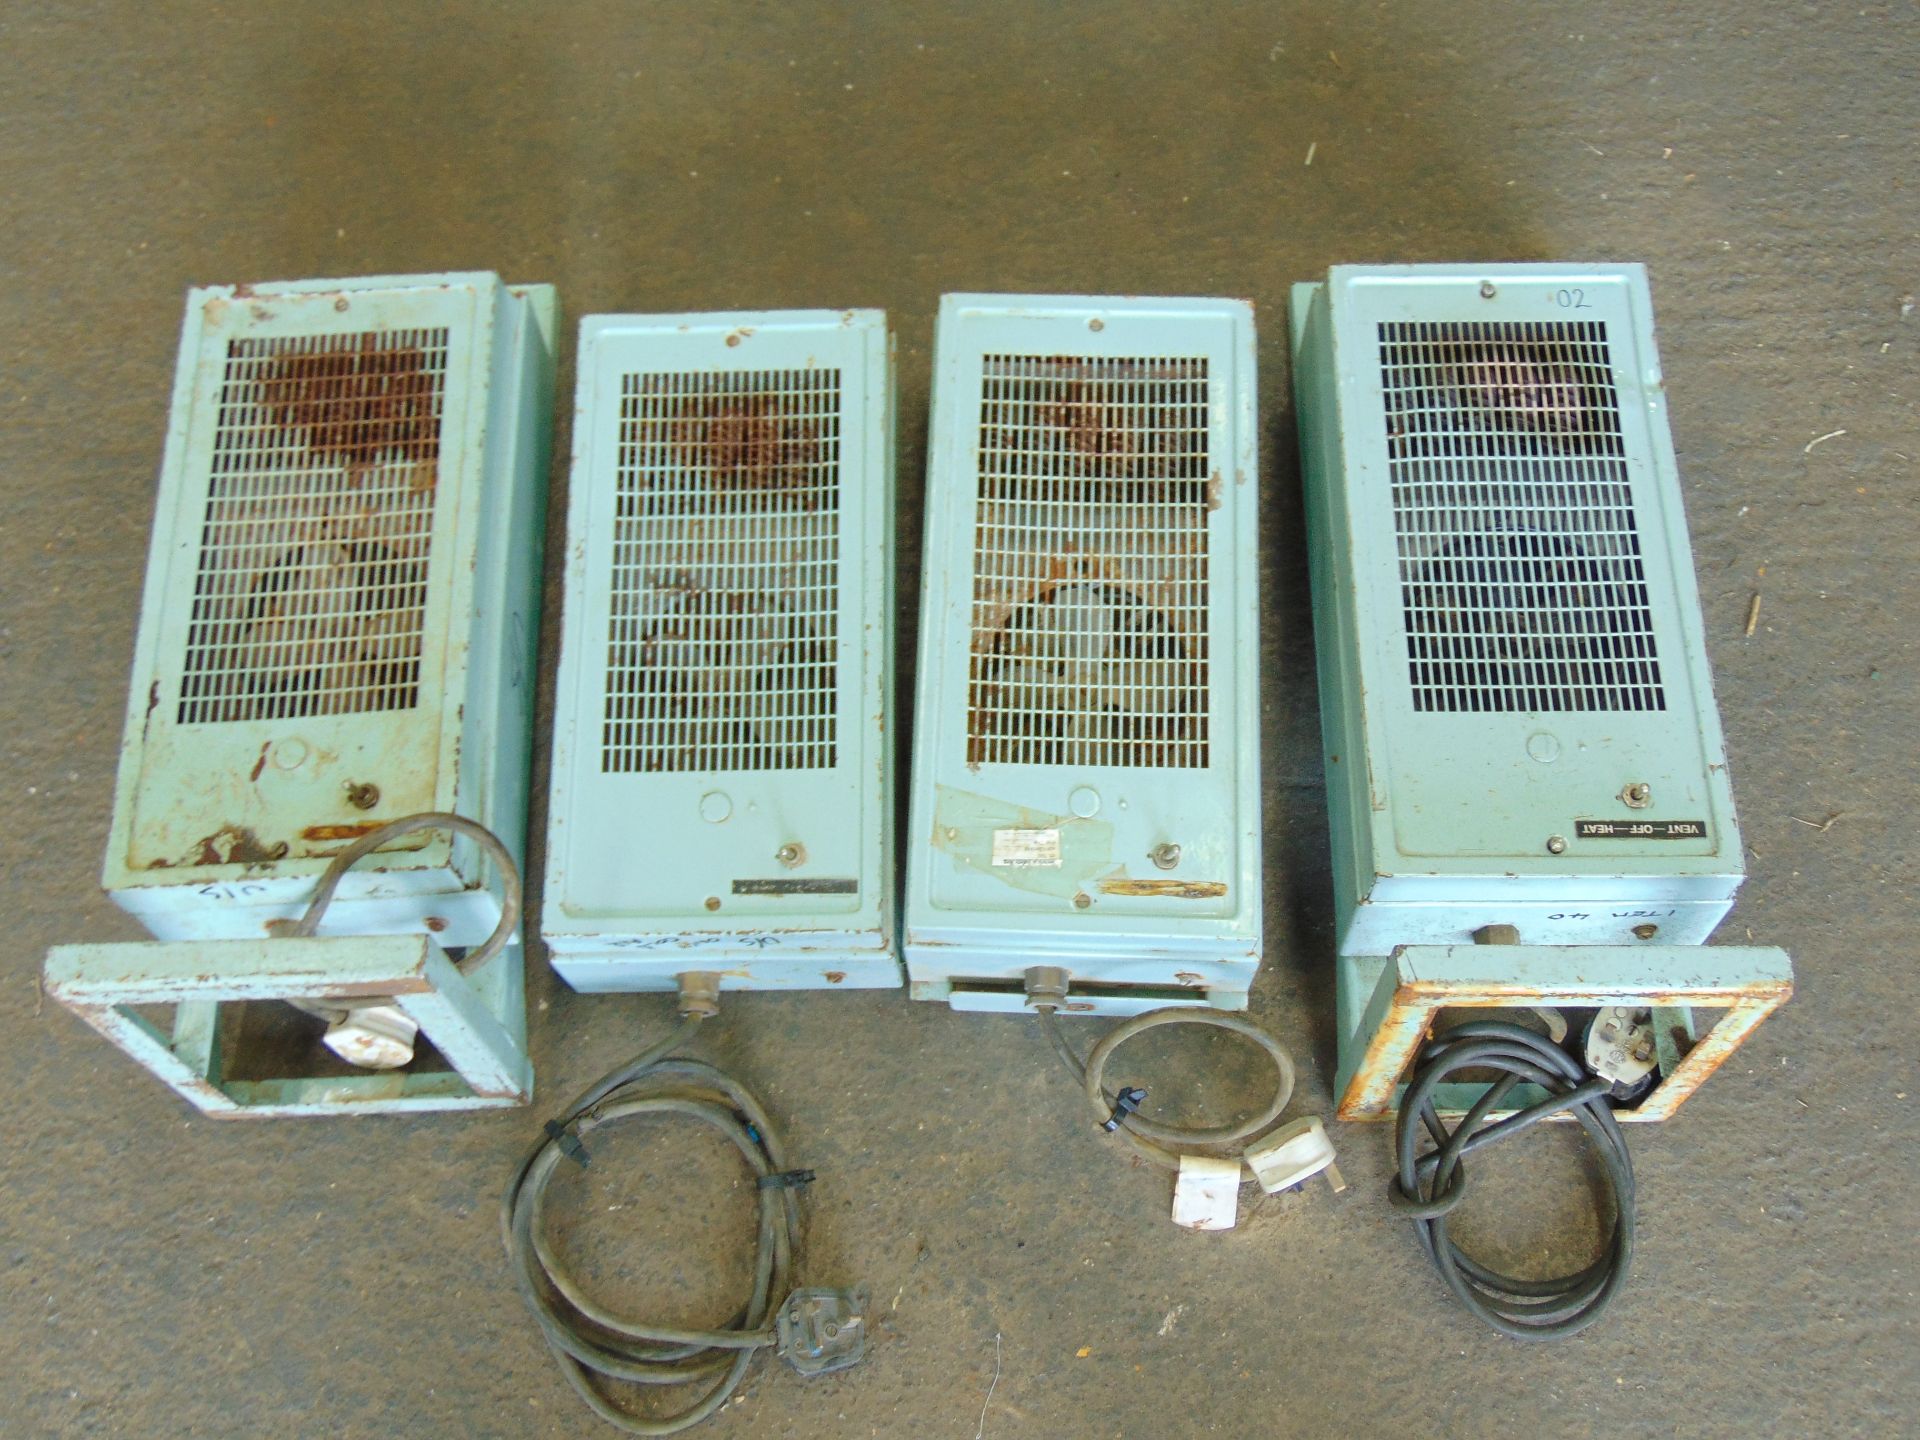 4 x Portable Air Conditioning Units